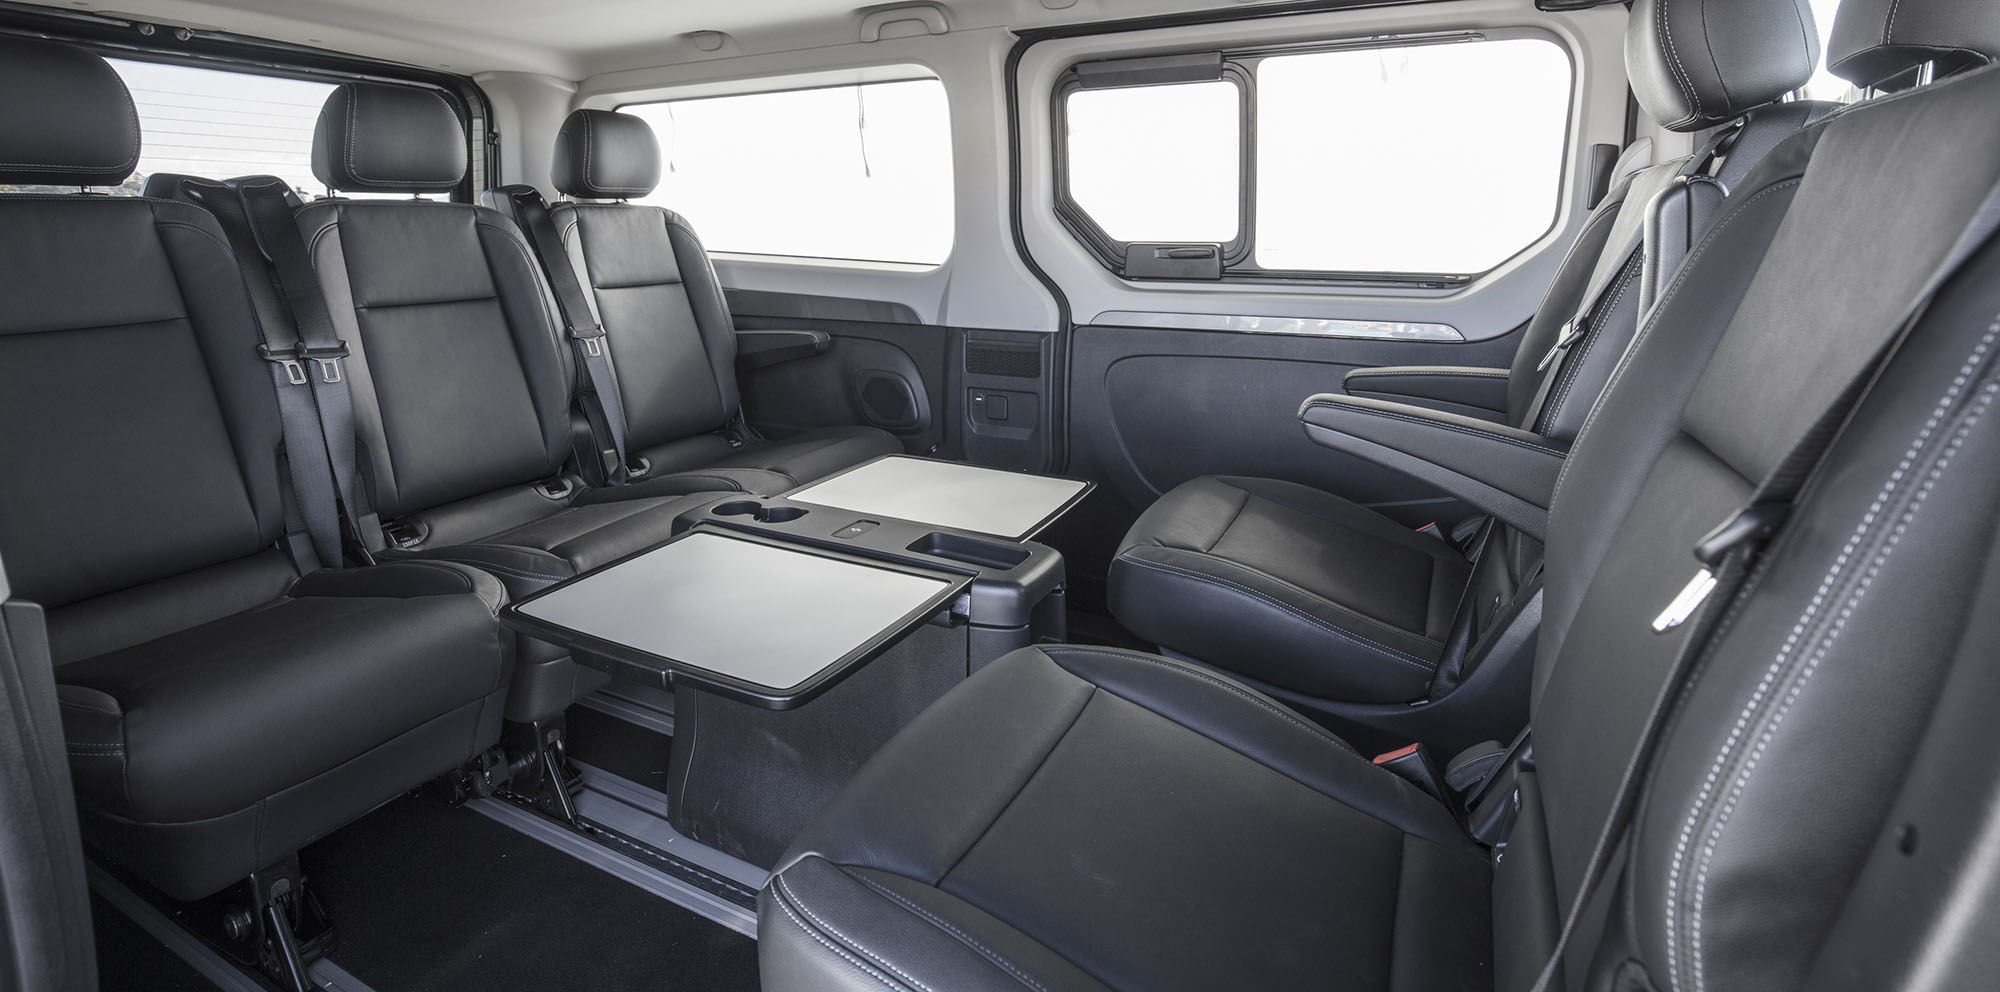 Renault Trafic SpaceClass: Luxury people mover launched in Cannes - UPDATE - photos ...2000 x 992